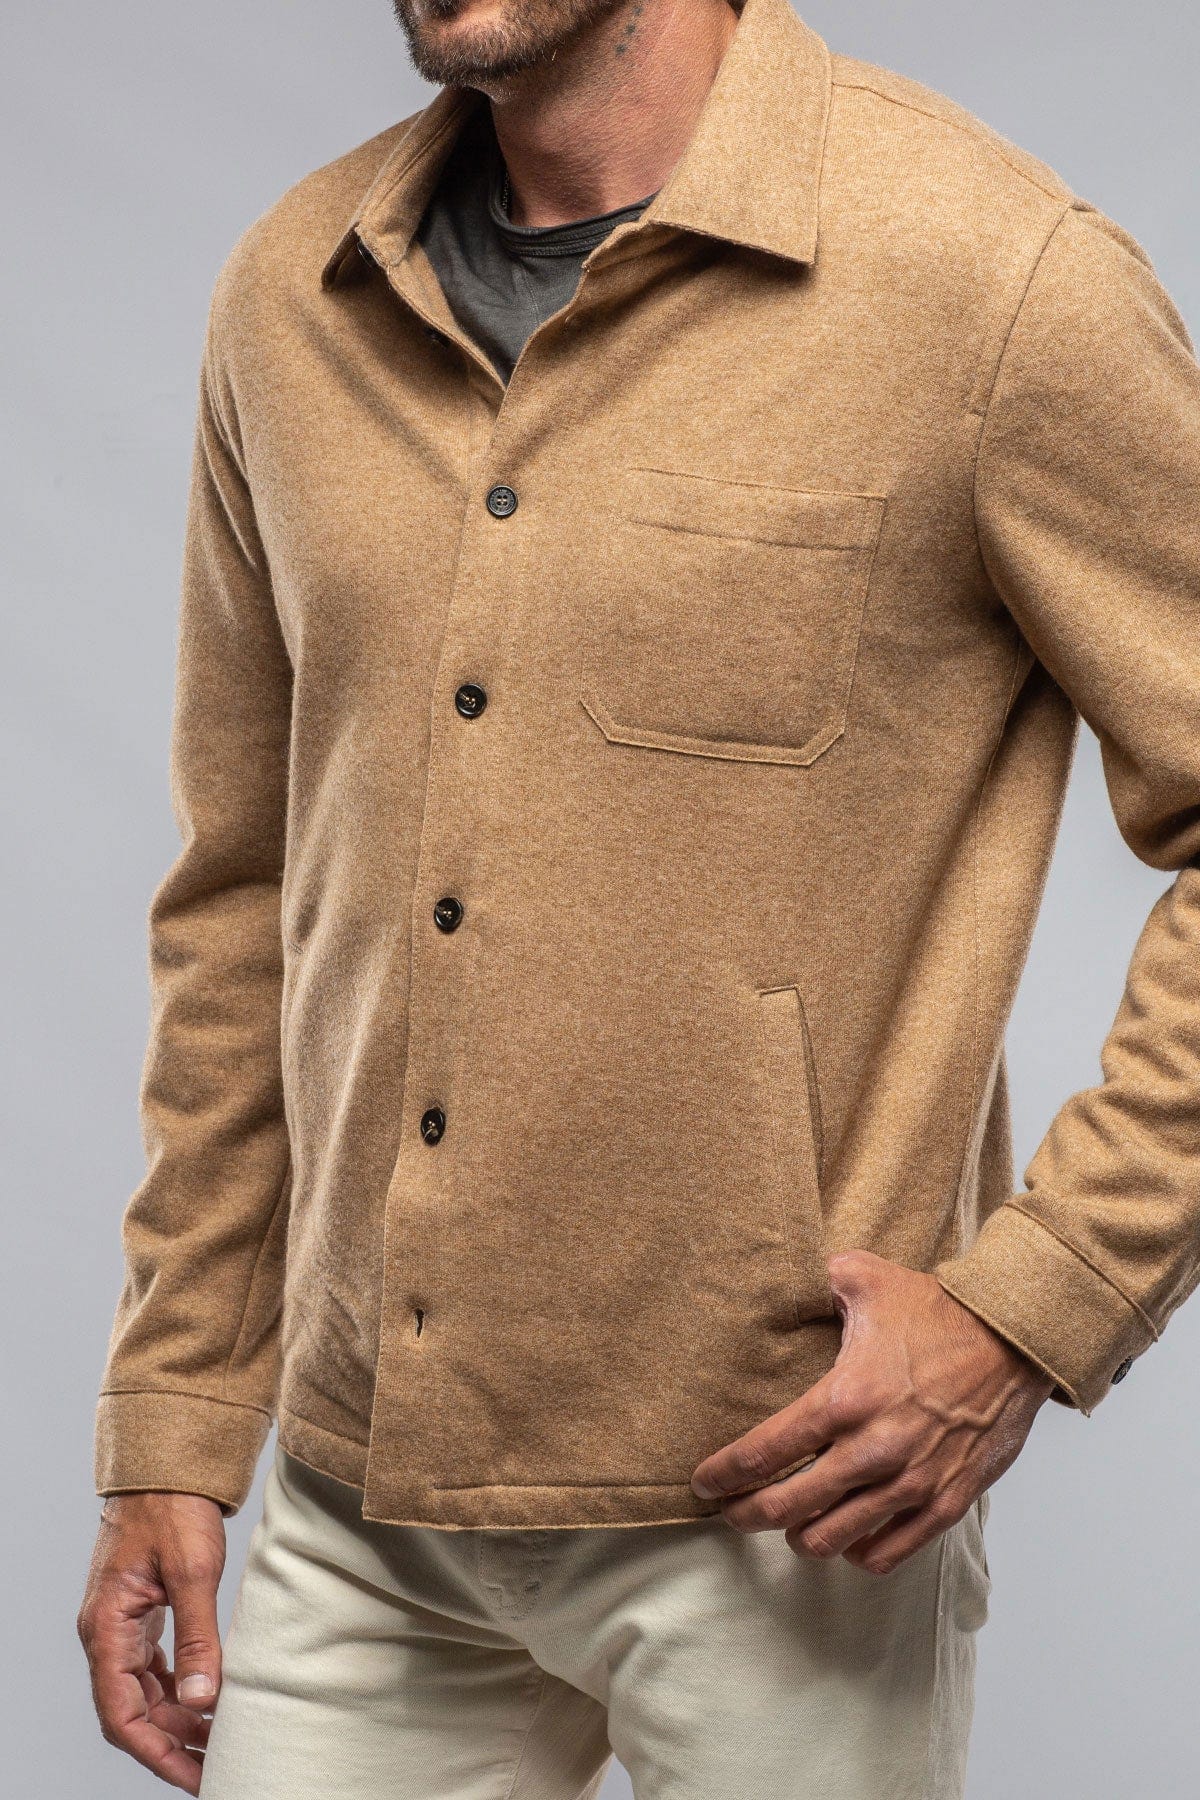 Sooter Cashmere Shirt In Camel - AXEL'S